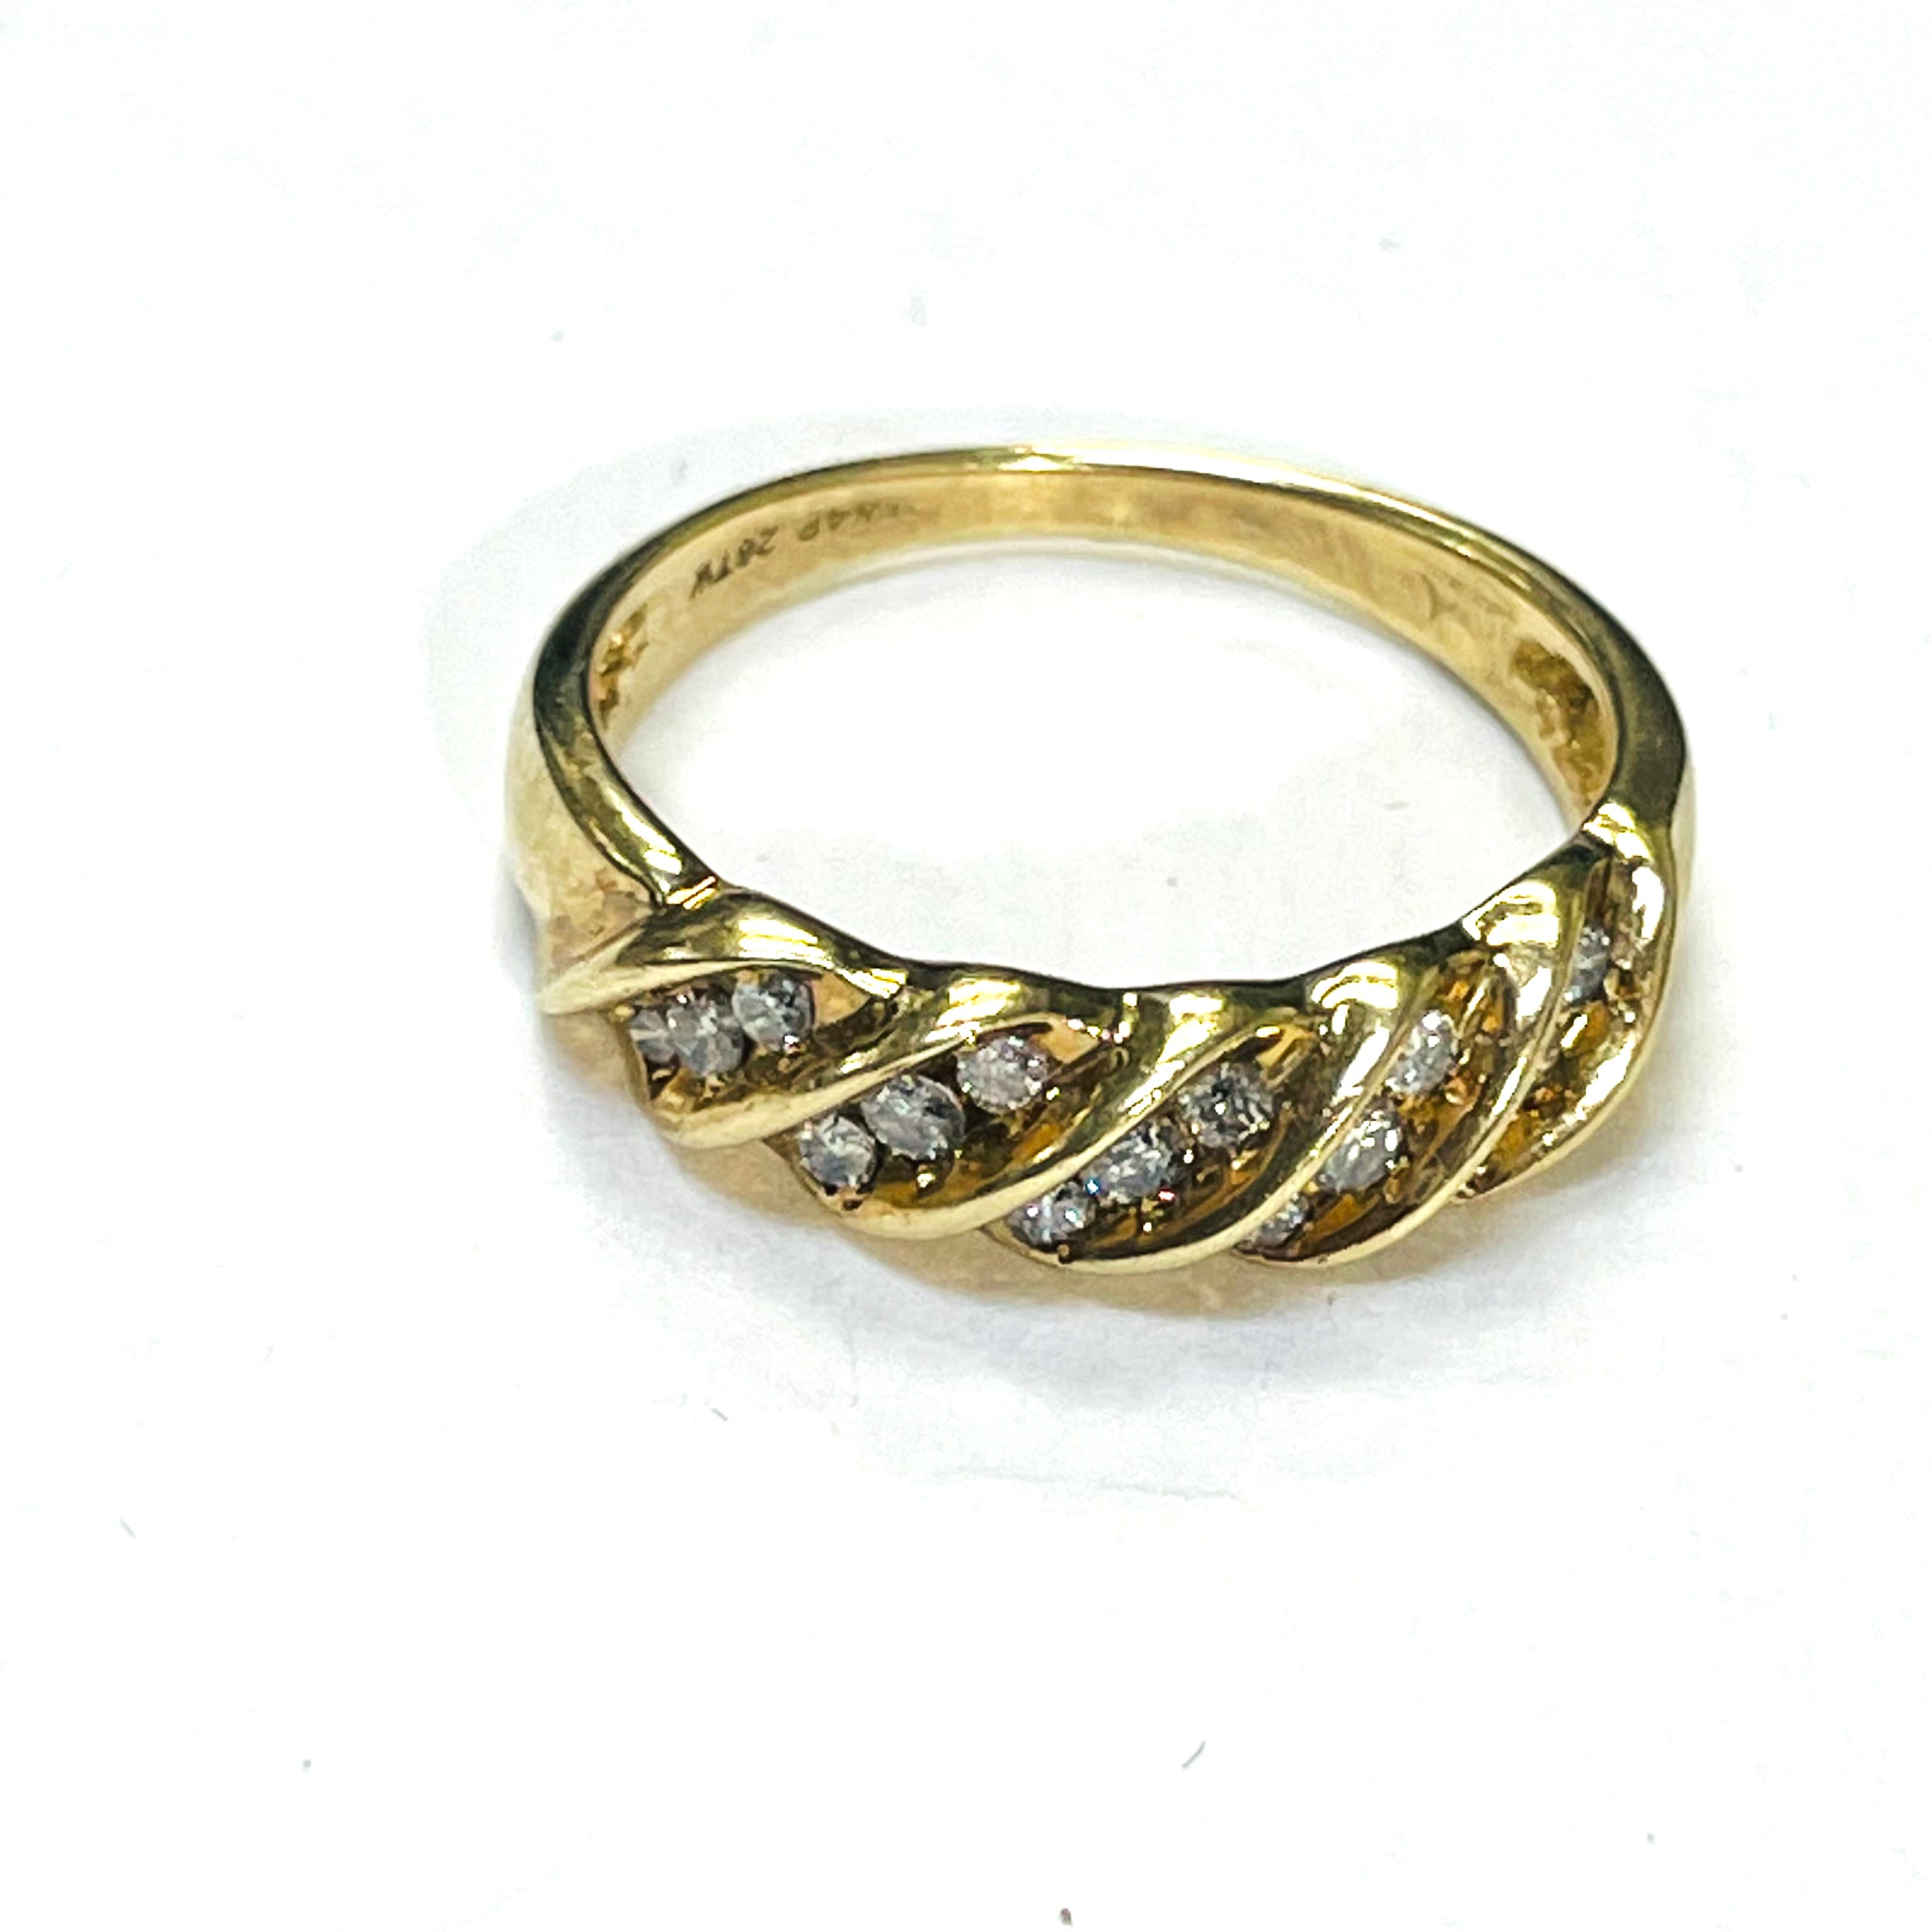 Solid 14k Yellow Gold Diamond Ring Size 7